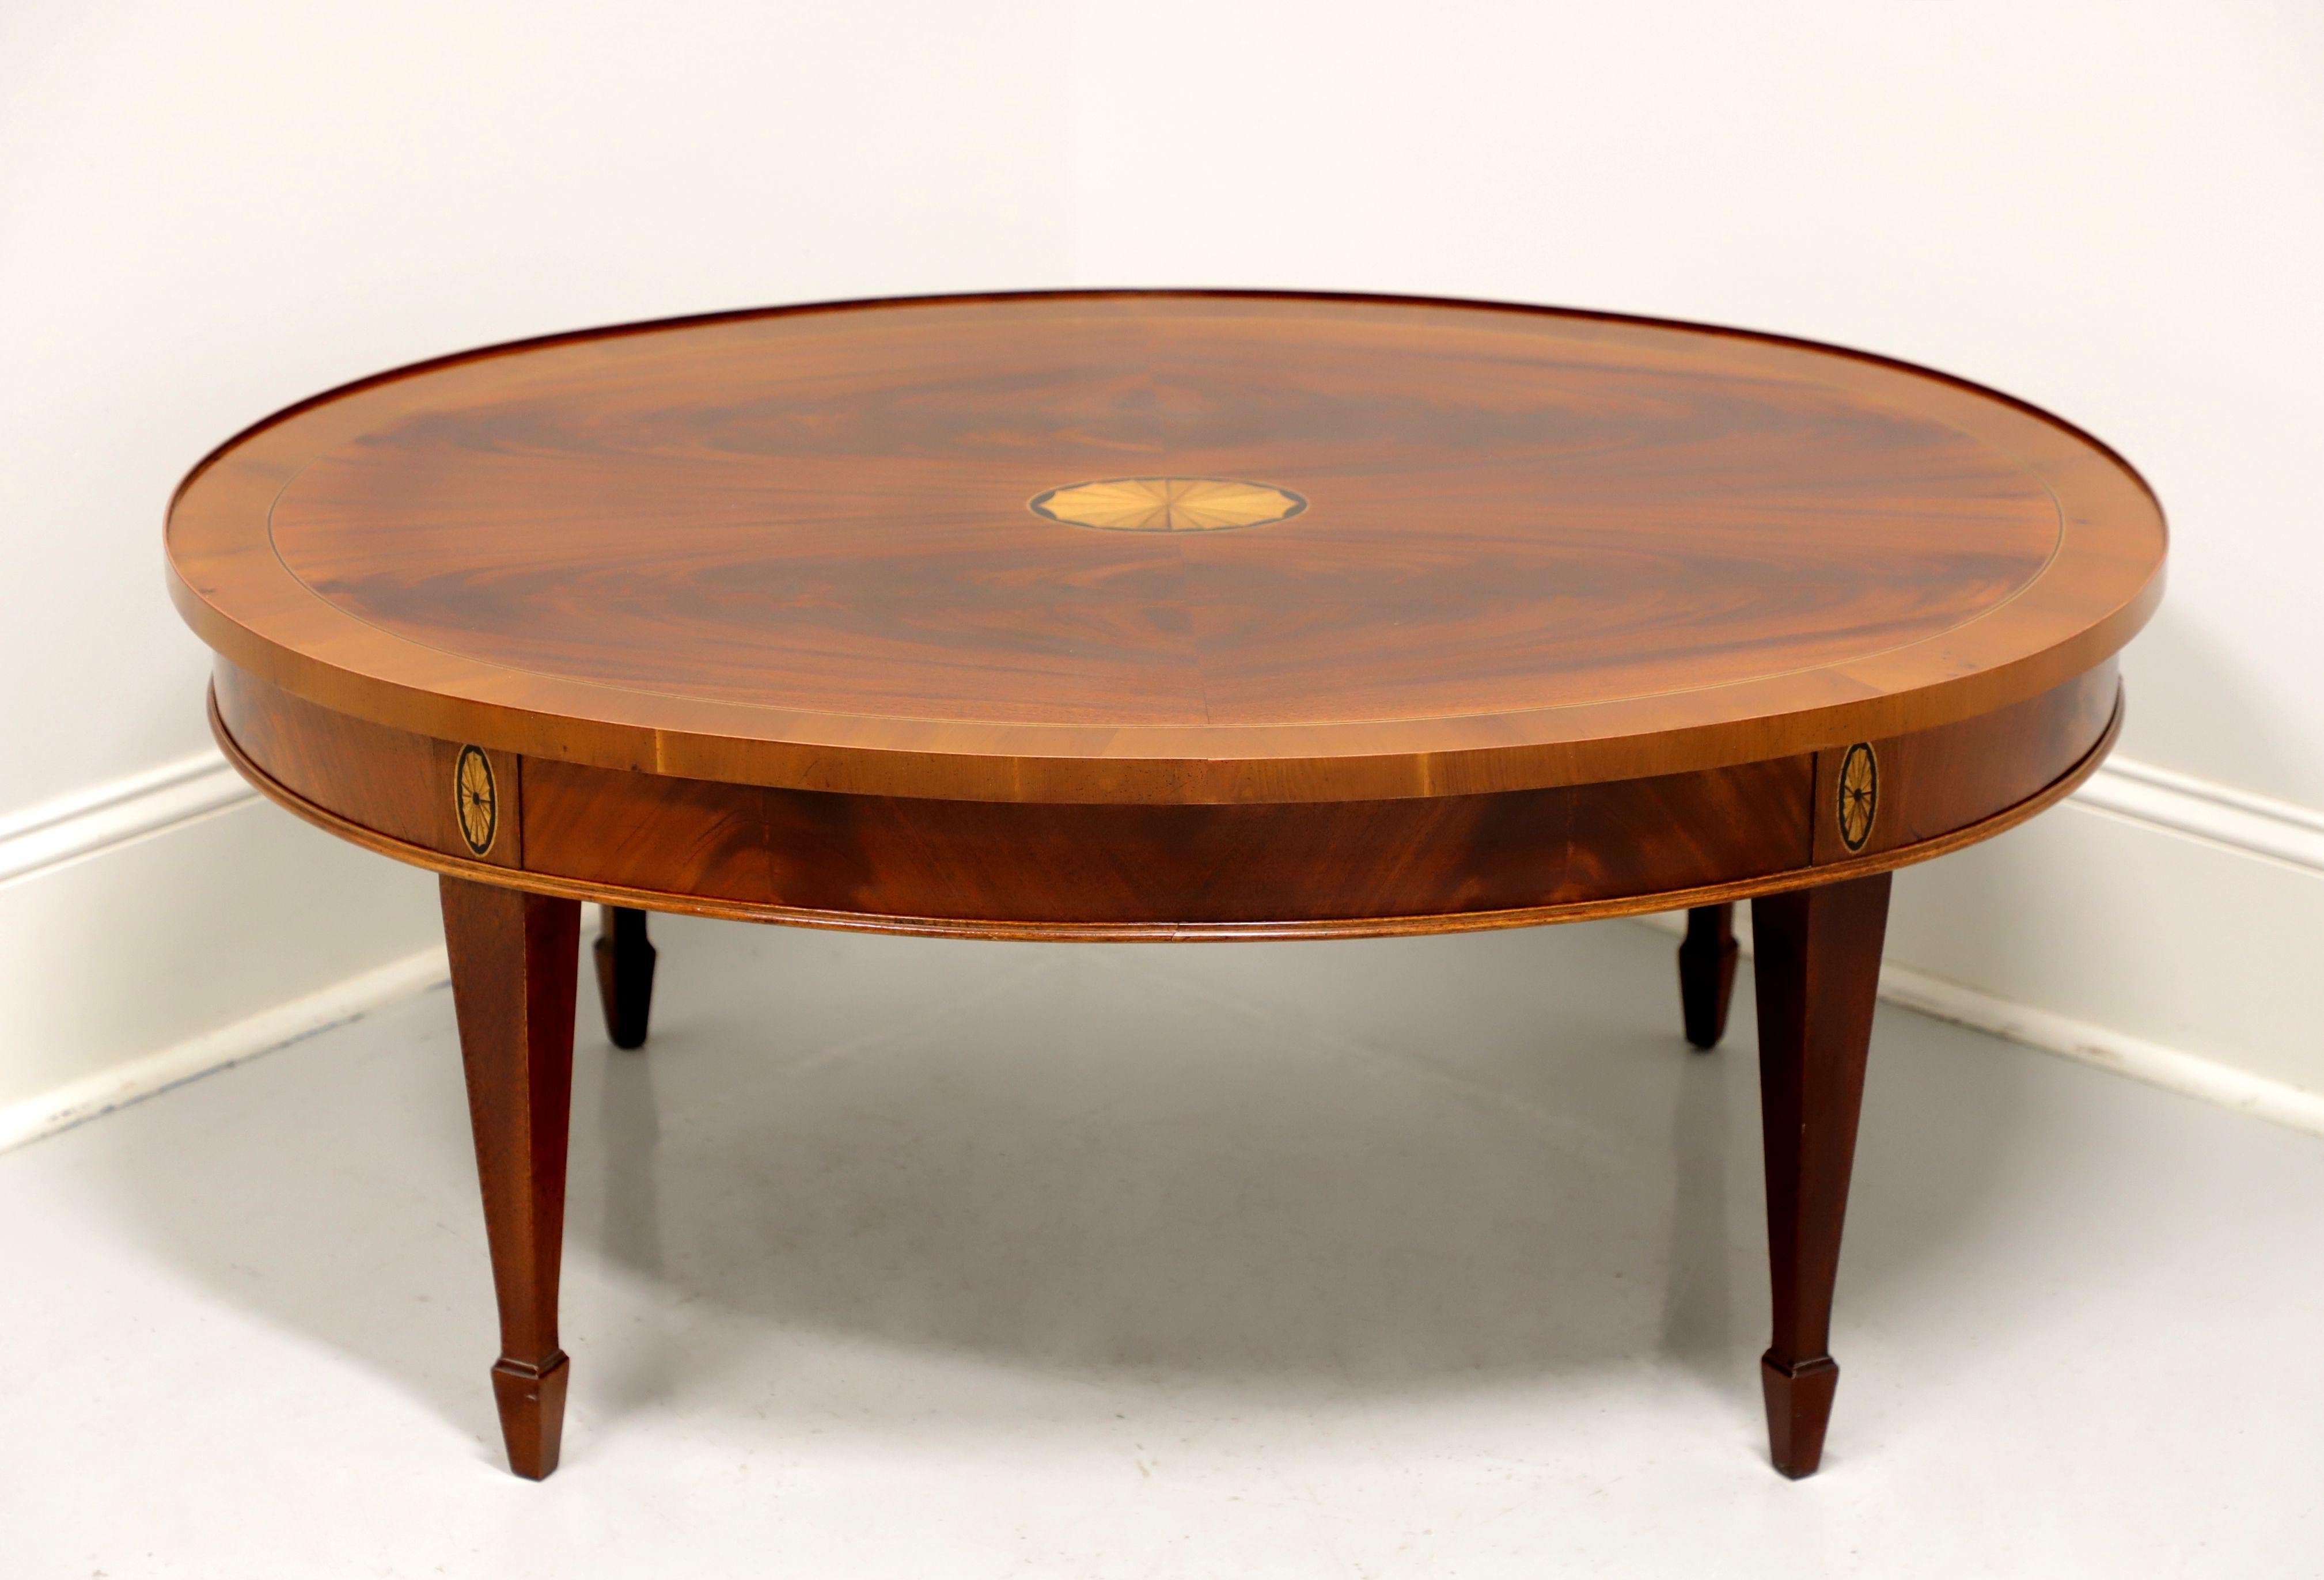 A Georgian style oval coffee table by Hekman Furniture, from their Copley Place Collection. Mahogany, flame mahogany and yew wood with banded & inlaid top, inlaid apron, tapered legs and spade feet. Made in North Carolina, USA, in the late 20th